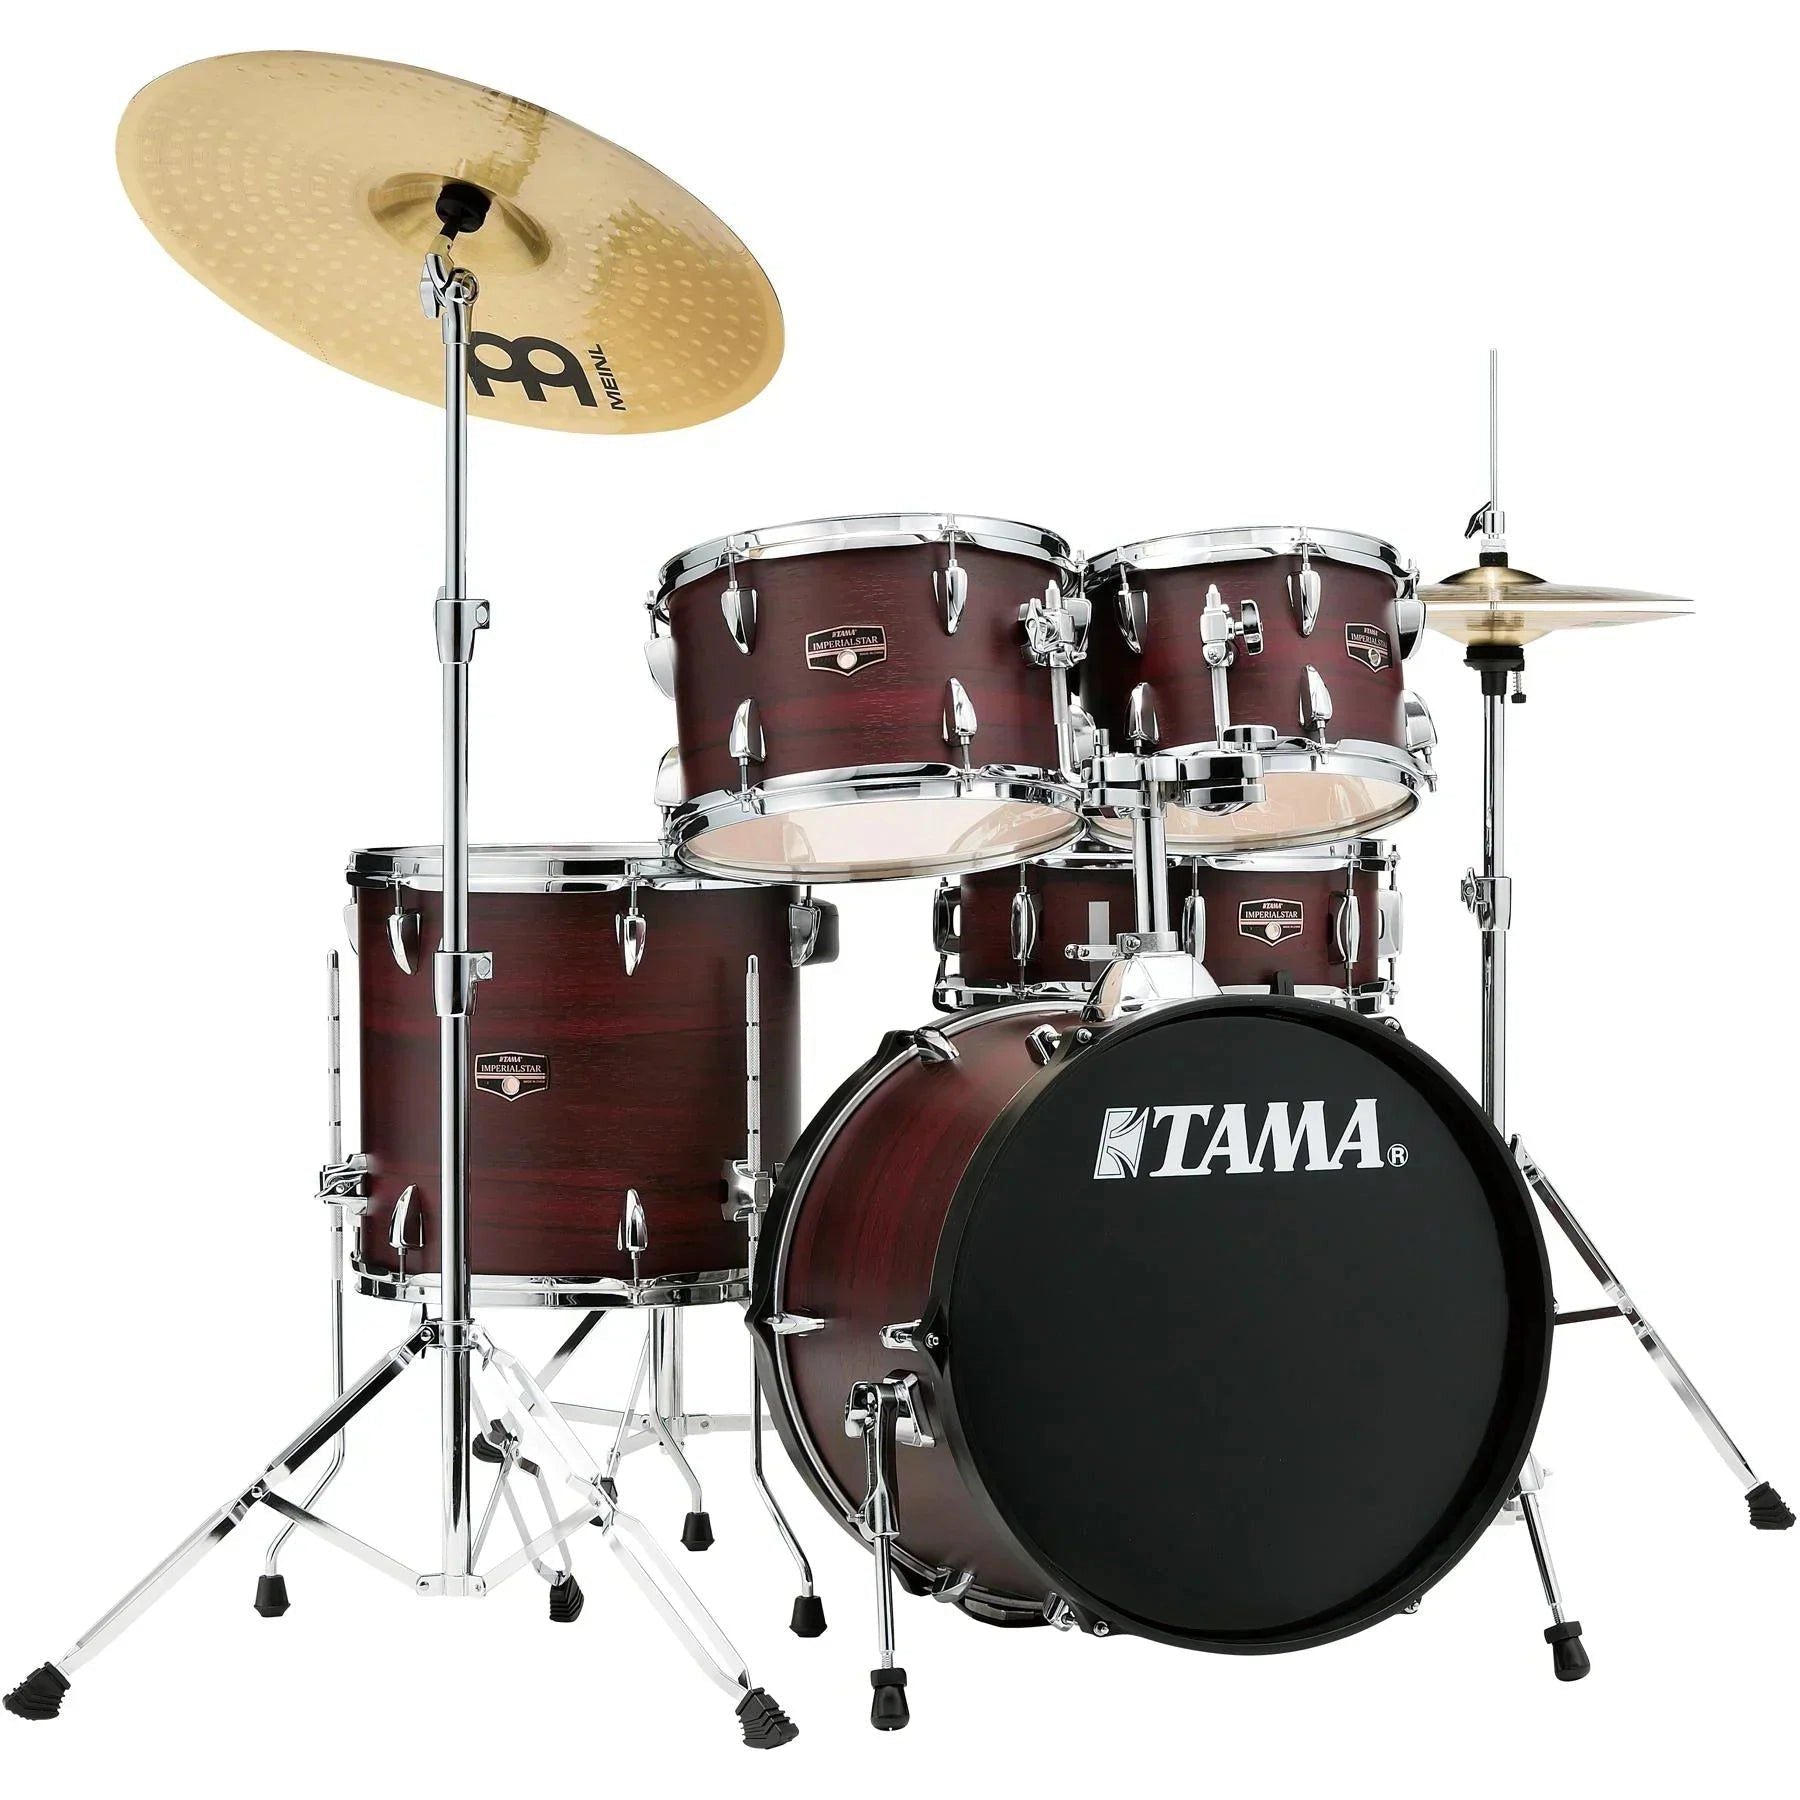 Trống Cơ Tama Imperialstar IE58C (18/10-12/14/14 + Cymbal), Accu-Tune Hoop - Việt Music